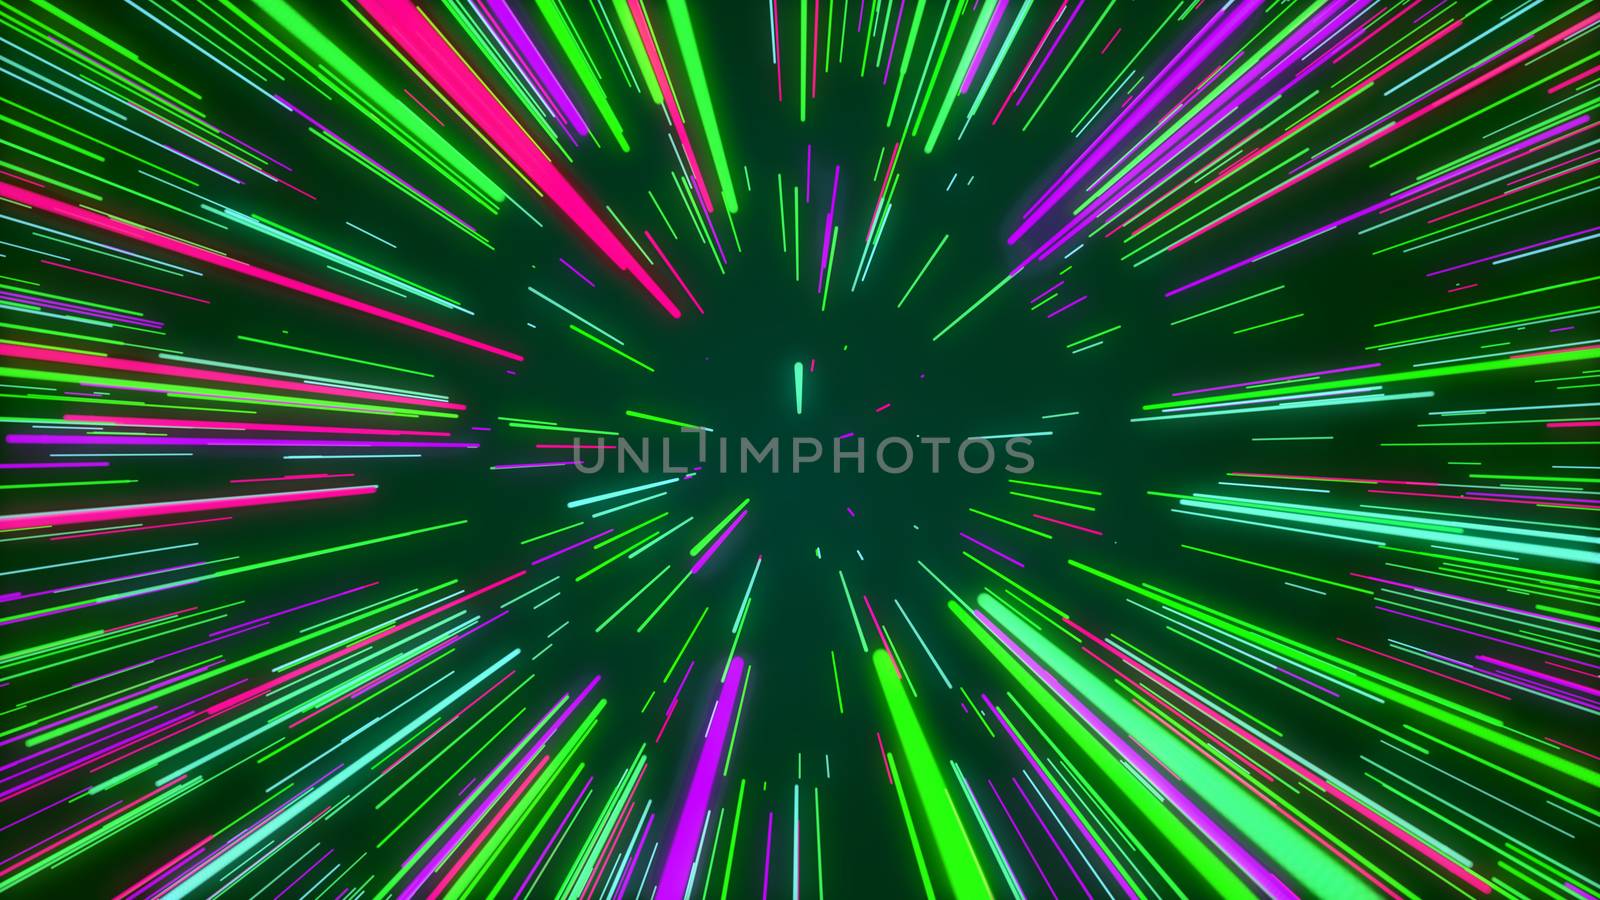 Optimistic 3d illustration of a rainbow cosmos tunnel from colorful straight stripes looking like sun rays shining joyfully in the marine cyberspace.